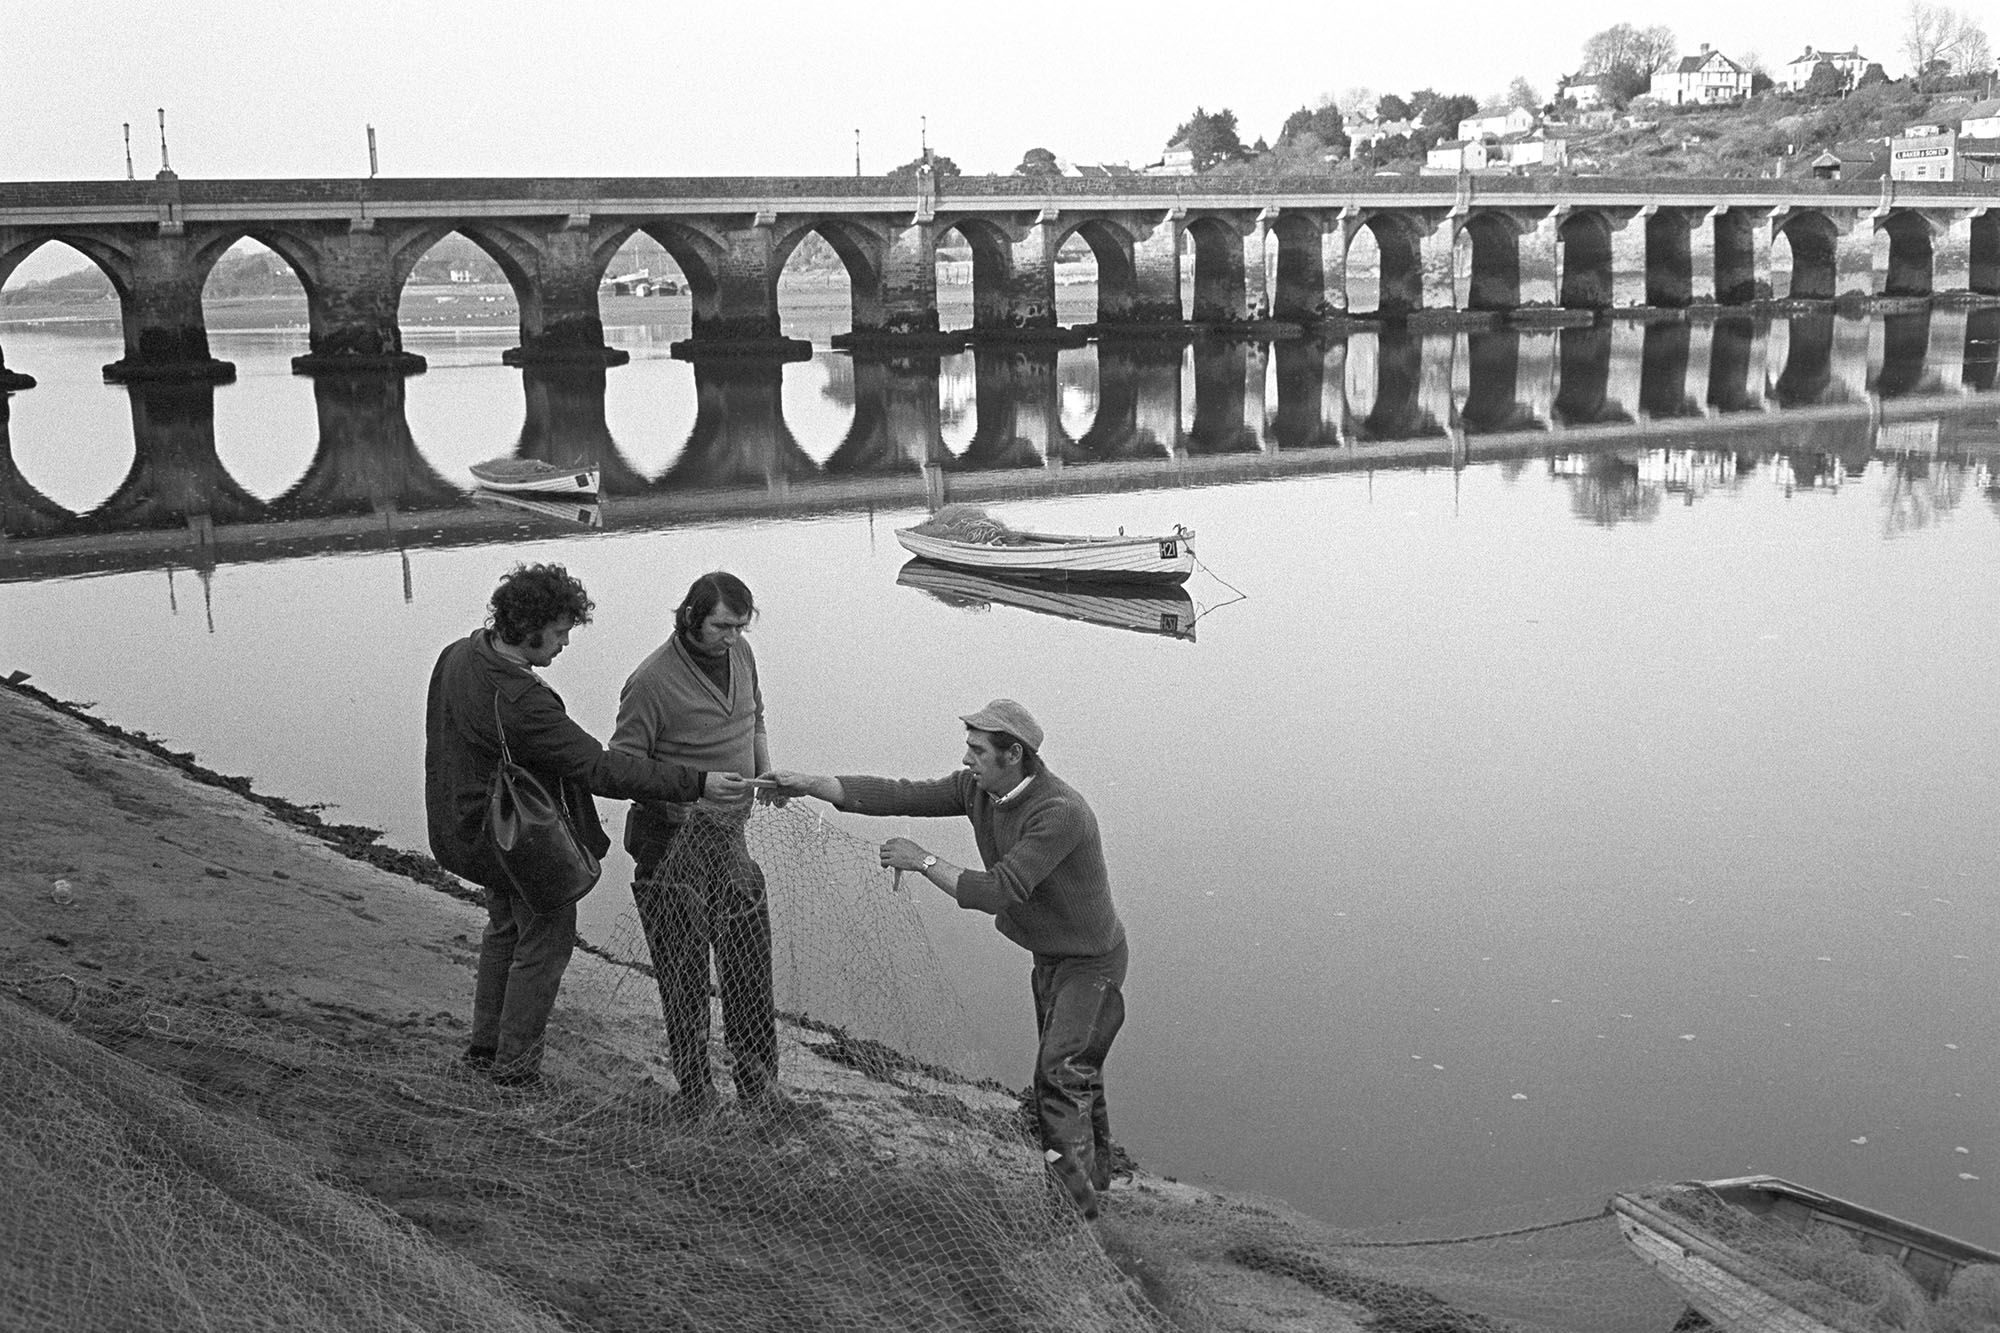 Salmon fishers mending nets in front of bridge. 
[Men checking their fishing nets on the banks of the river Torridge by Bideford Bridge. Rowing boats can be seen on the river. The bridge is also known as Bideford Long Bridge and Bideford Old Bridge.]